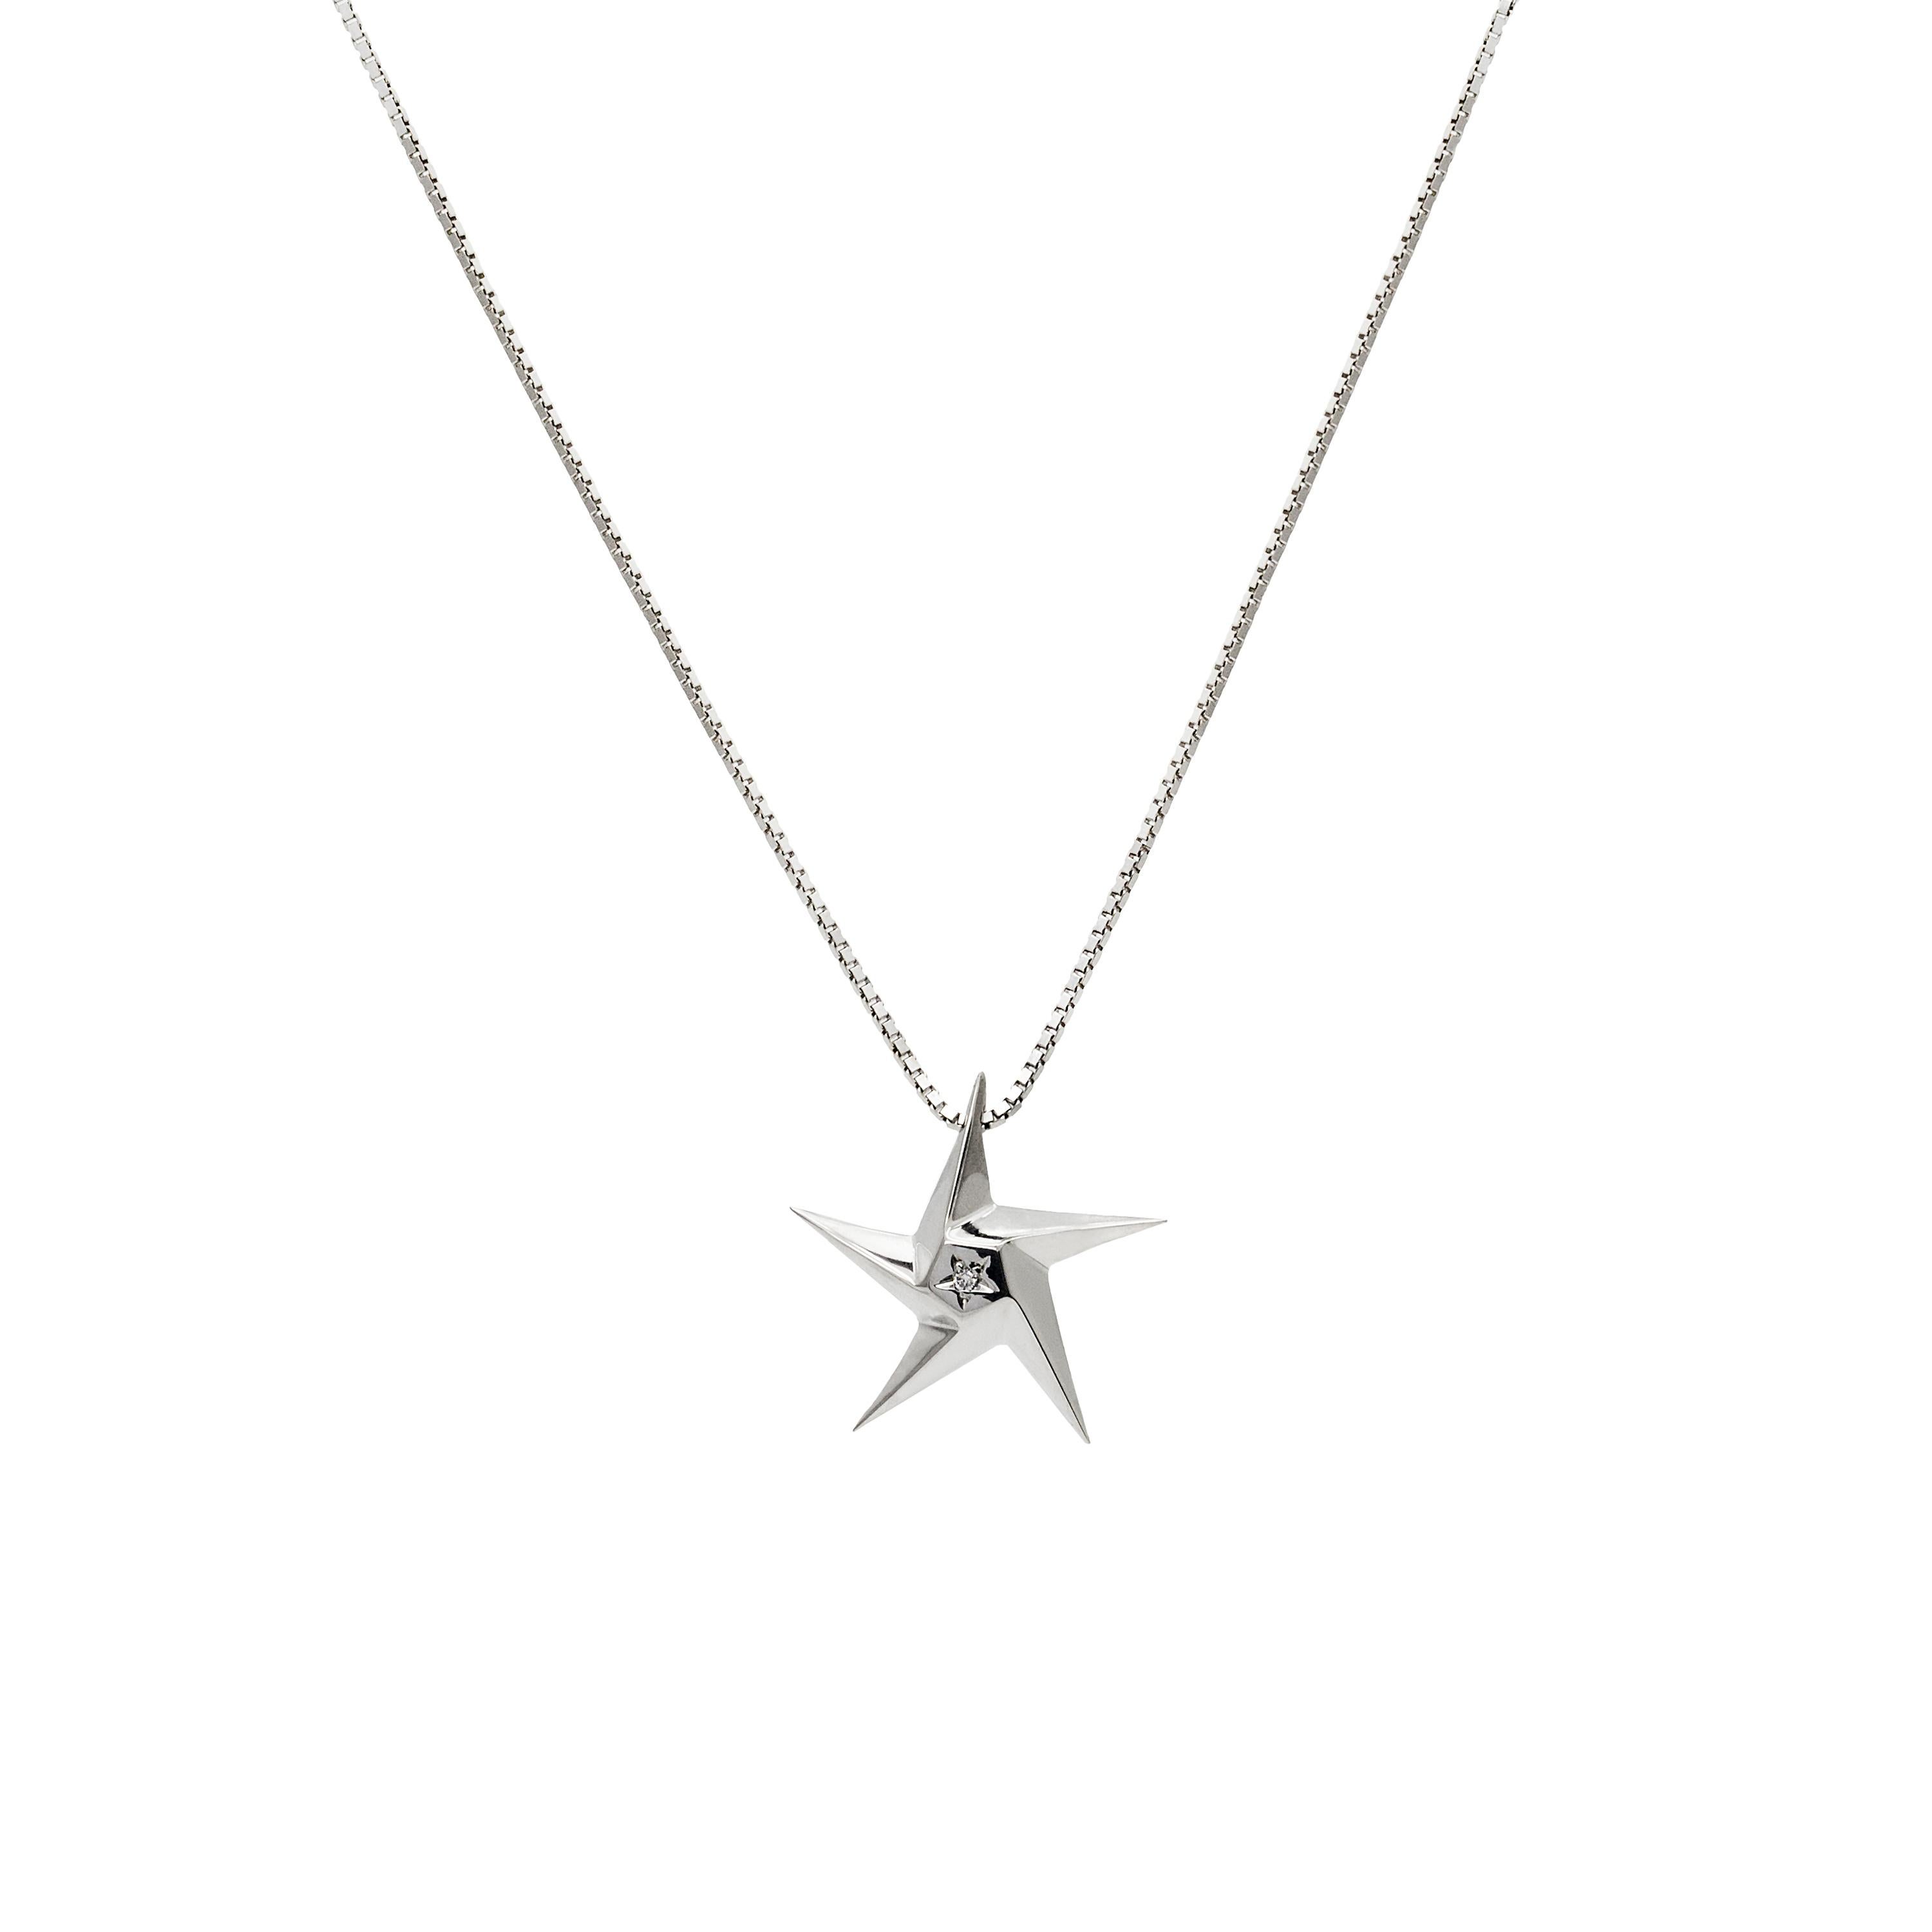 Contemporary Daou  Diamond Star Necklace in White Gold a collar choker style necklace  For Sale